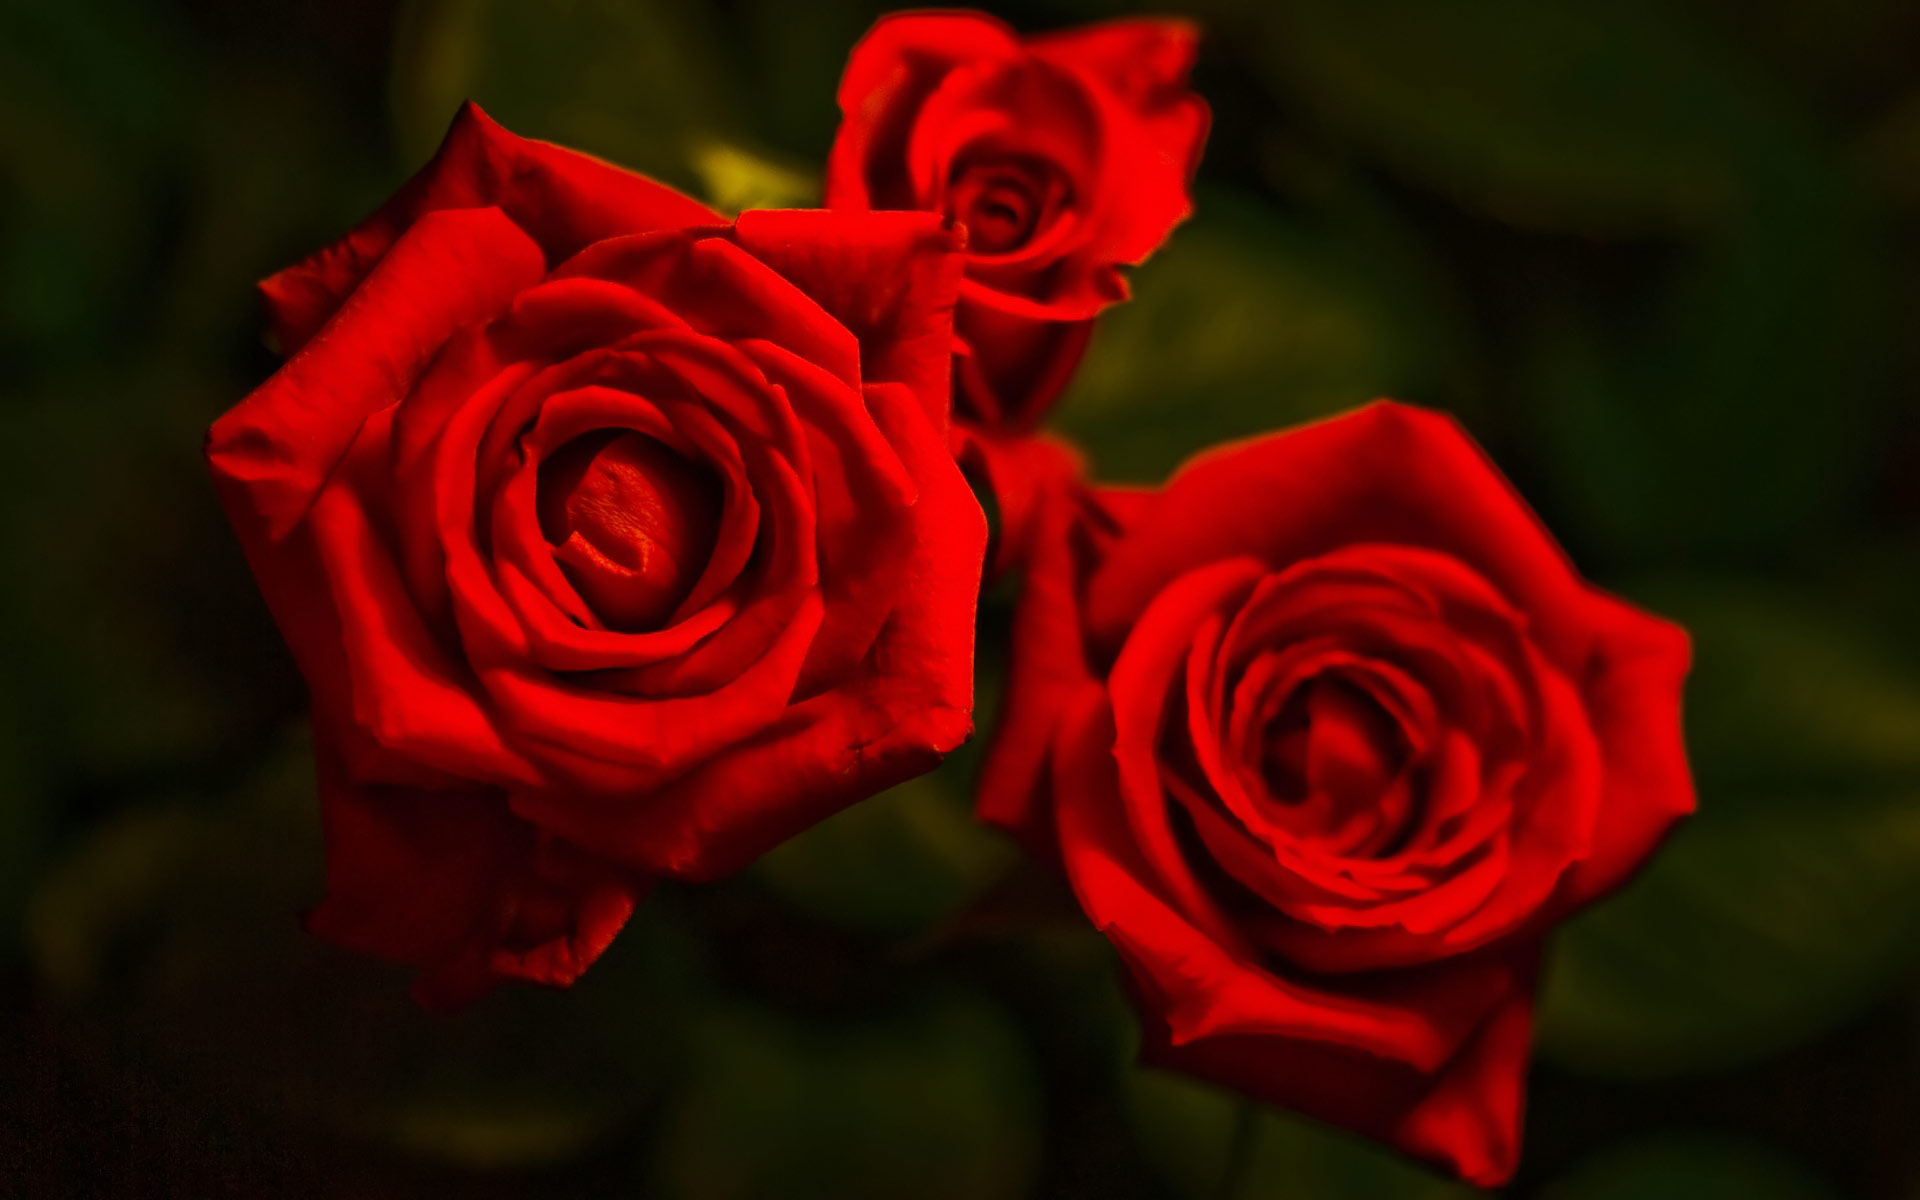 rose images photos wallpapers,flower,rose,garden roses,flowering plant,red